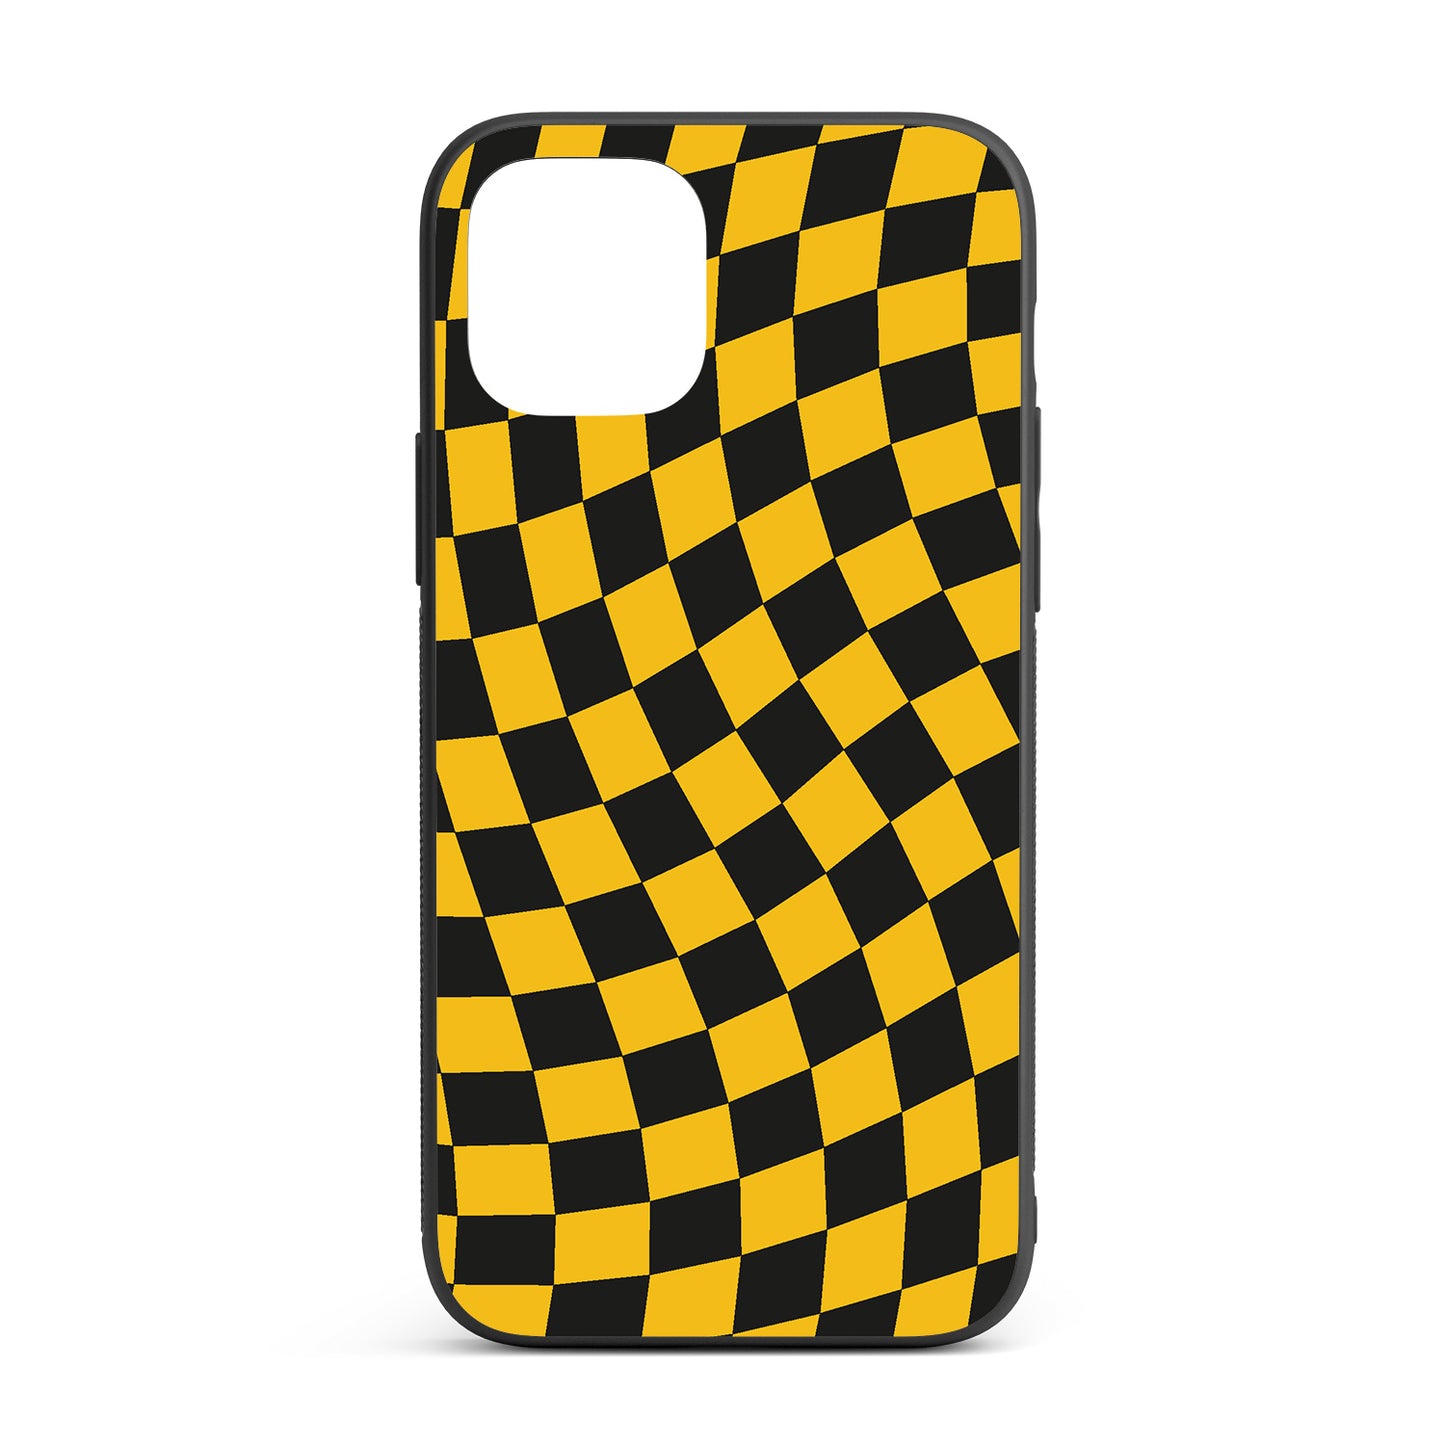 Race Ready iPhone glass case